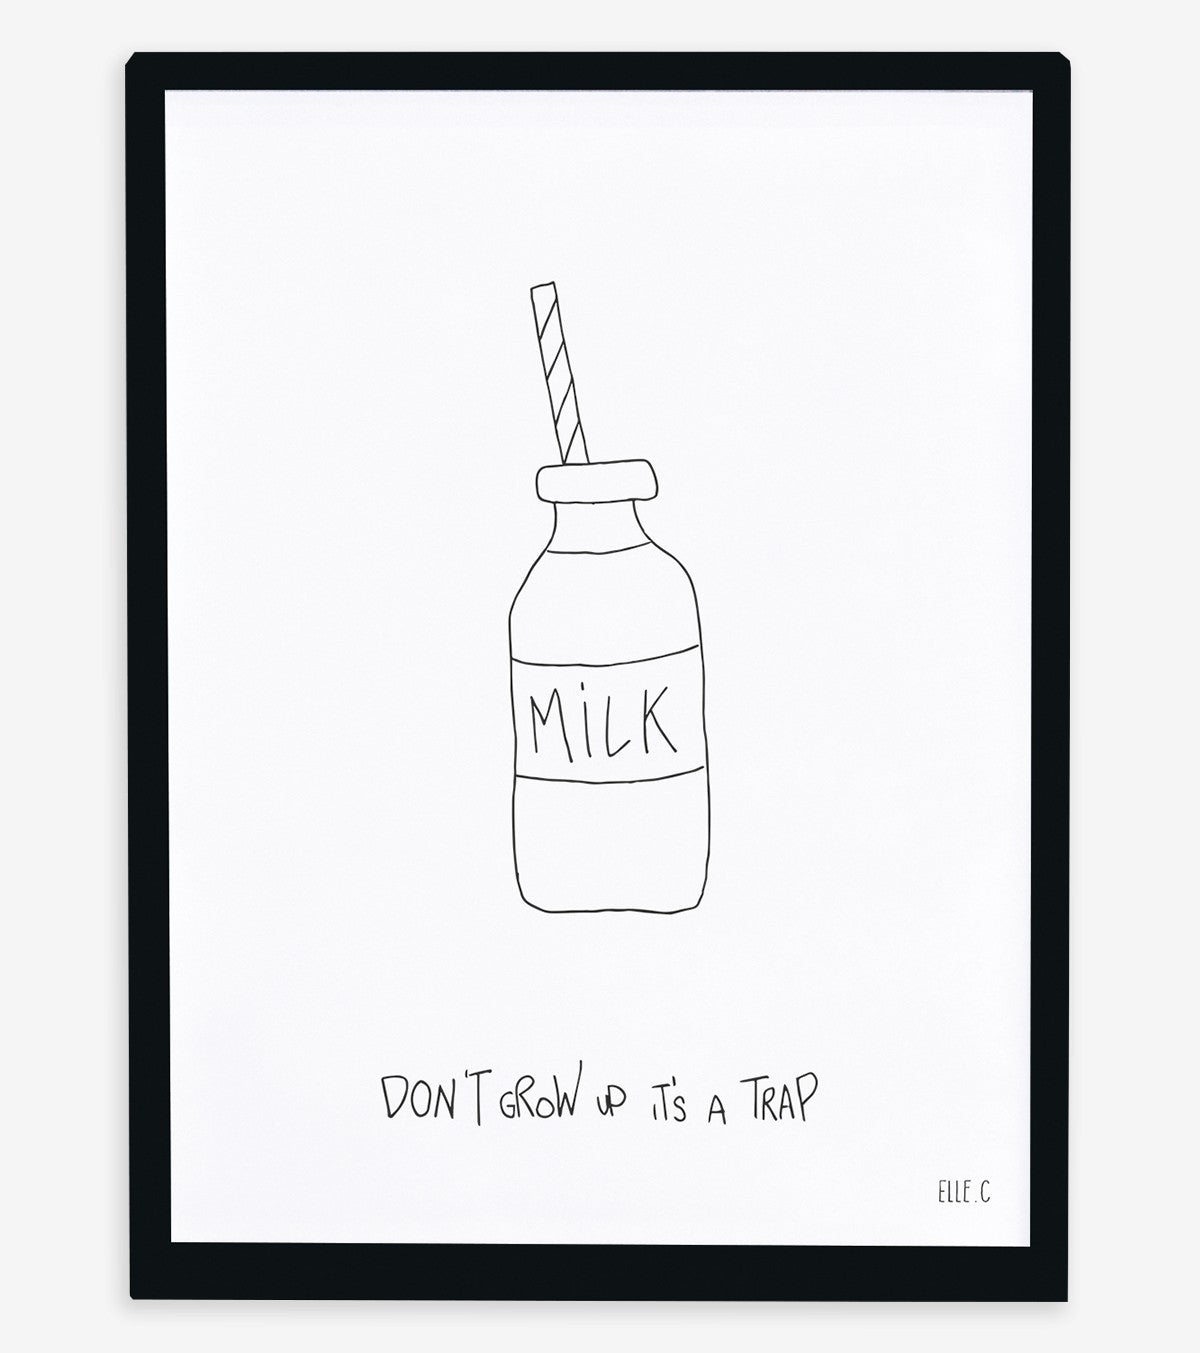 BACK TO SCHOOL - Children's poster - Don't grow up